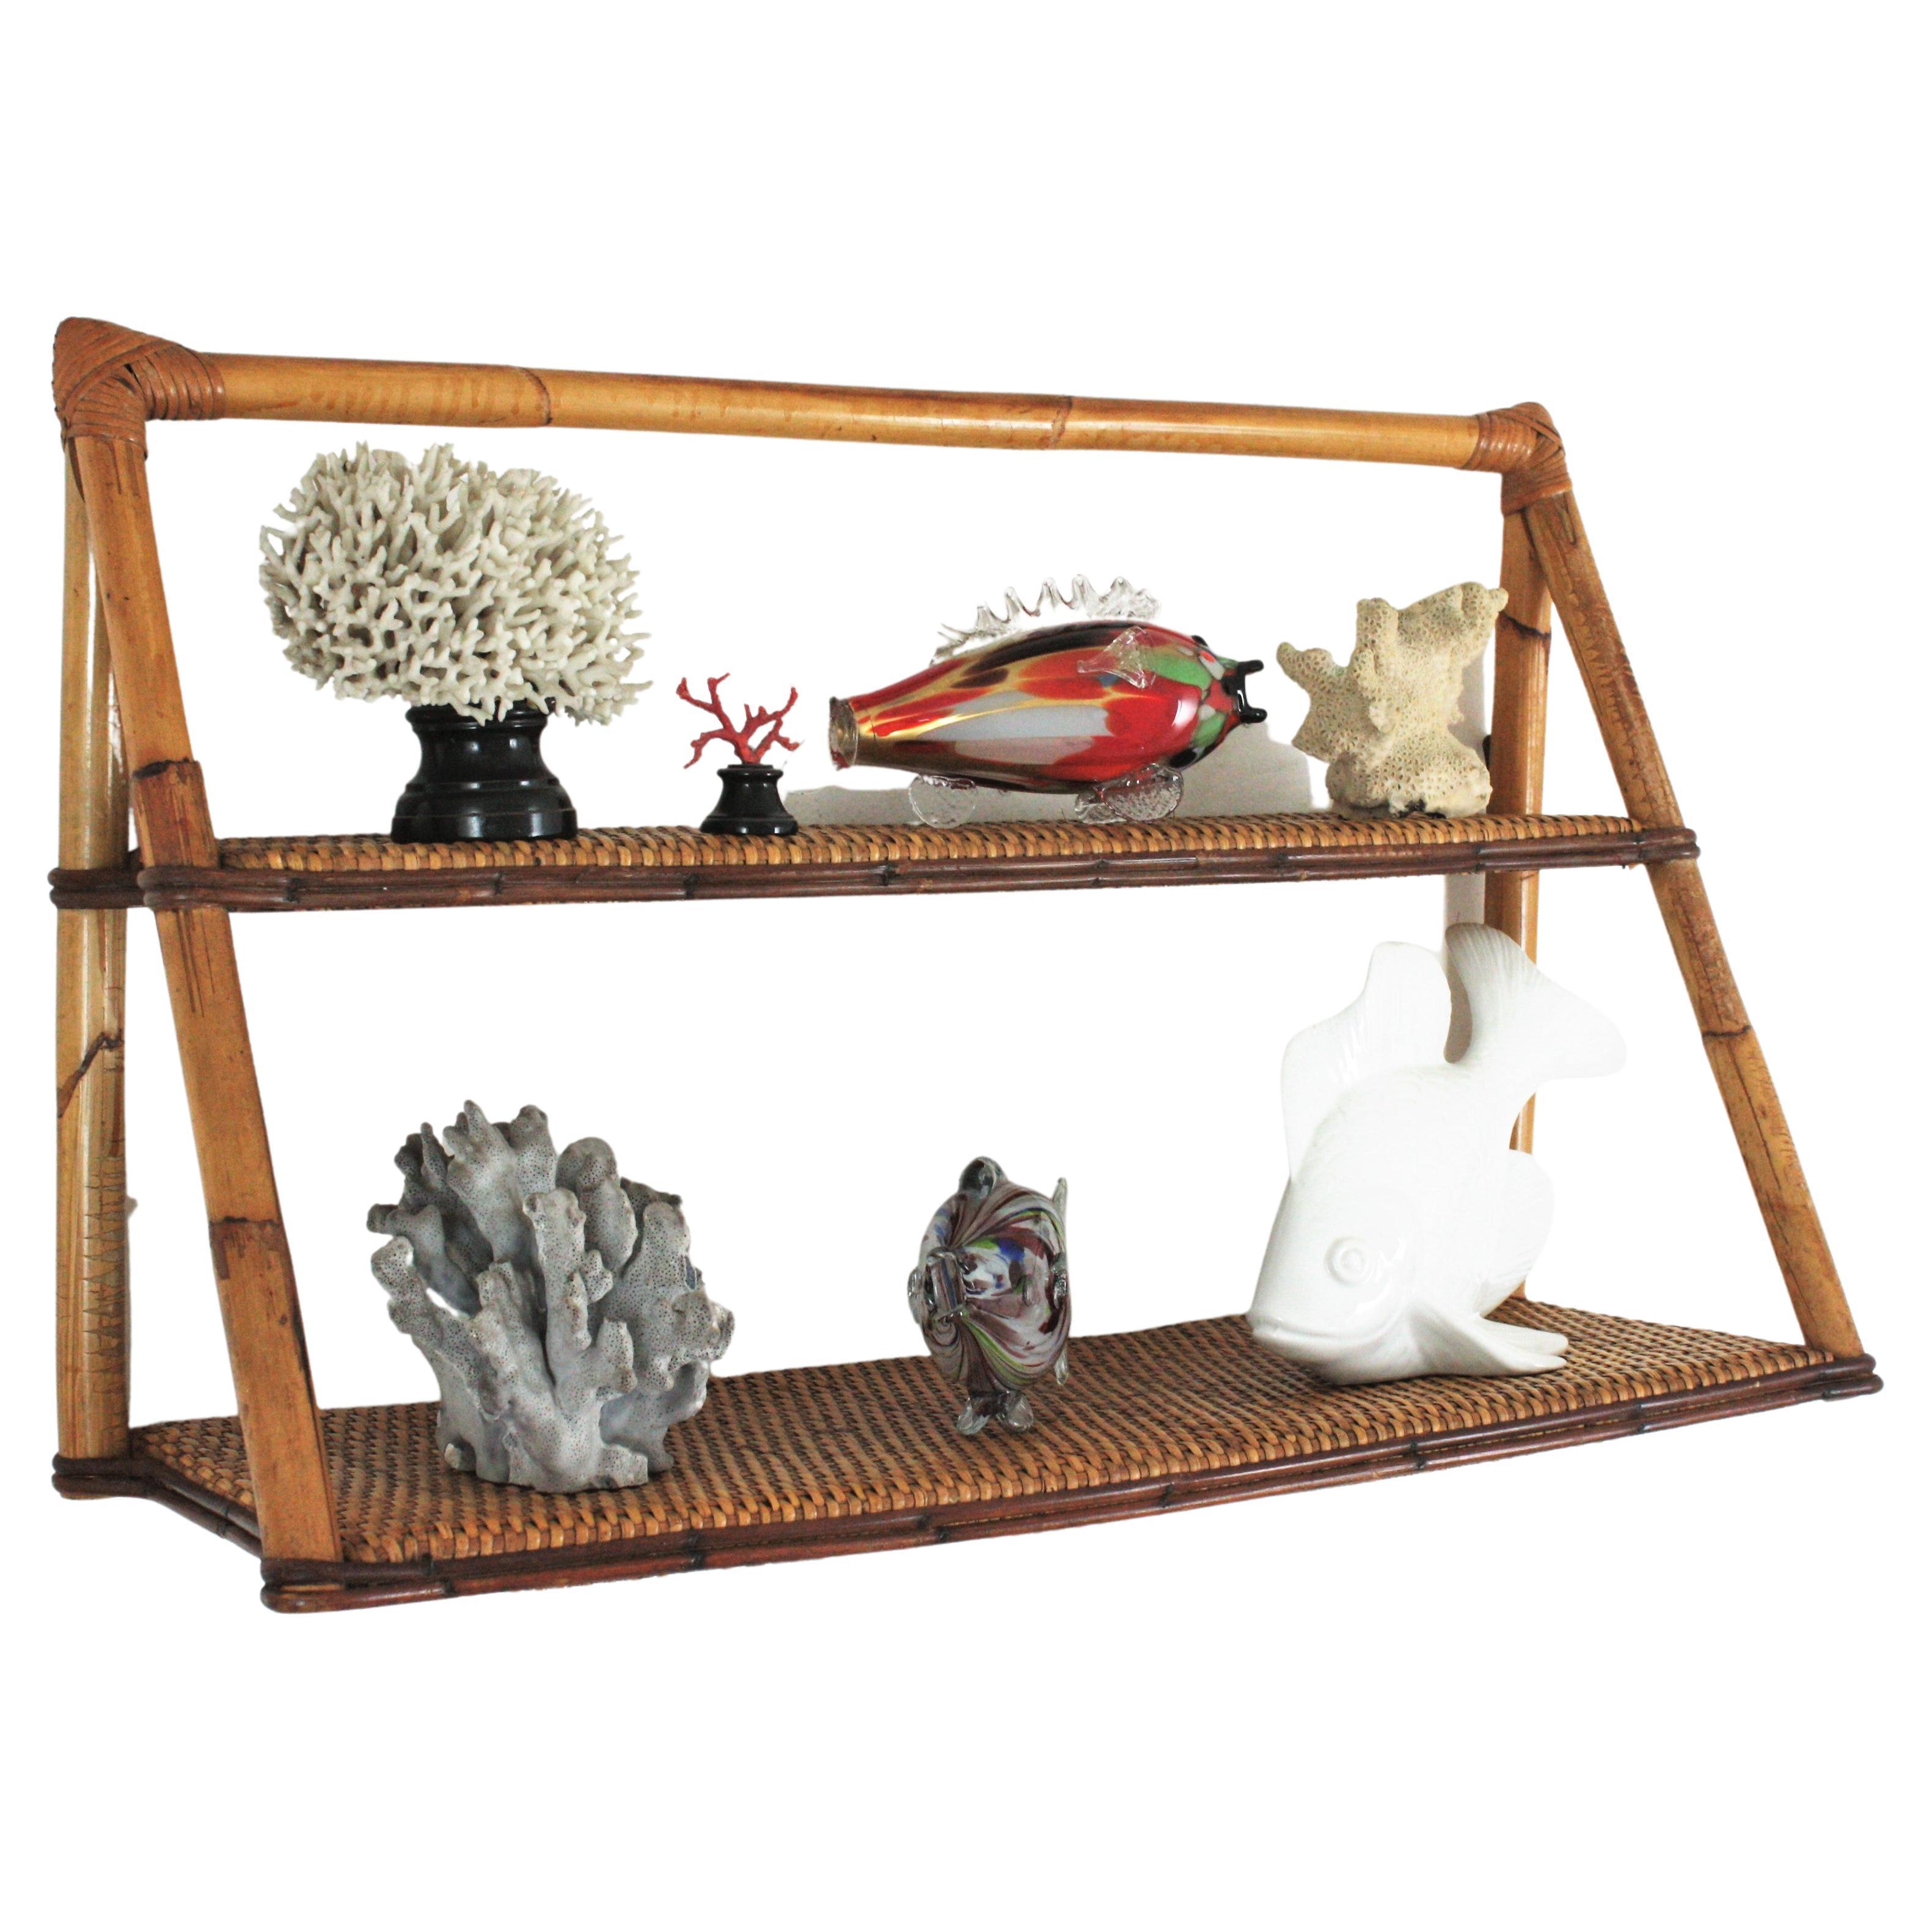 French vintage coastal rattan bamboo two-tier shelf, 1960s
This french riviera wall shelf features a bamboo structure holding two shelves covered by woven wicker. The upper shelf is smaller than the lower shelf creating a beautiful effect.
It will